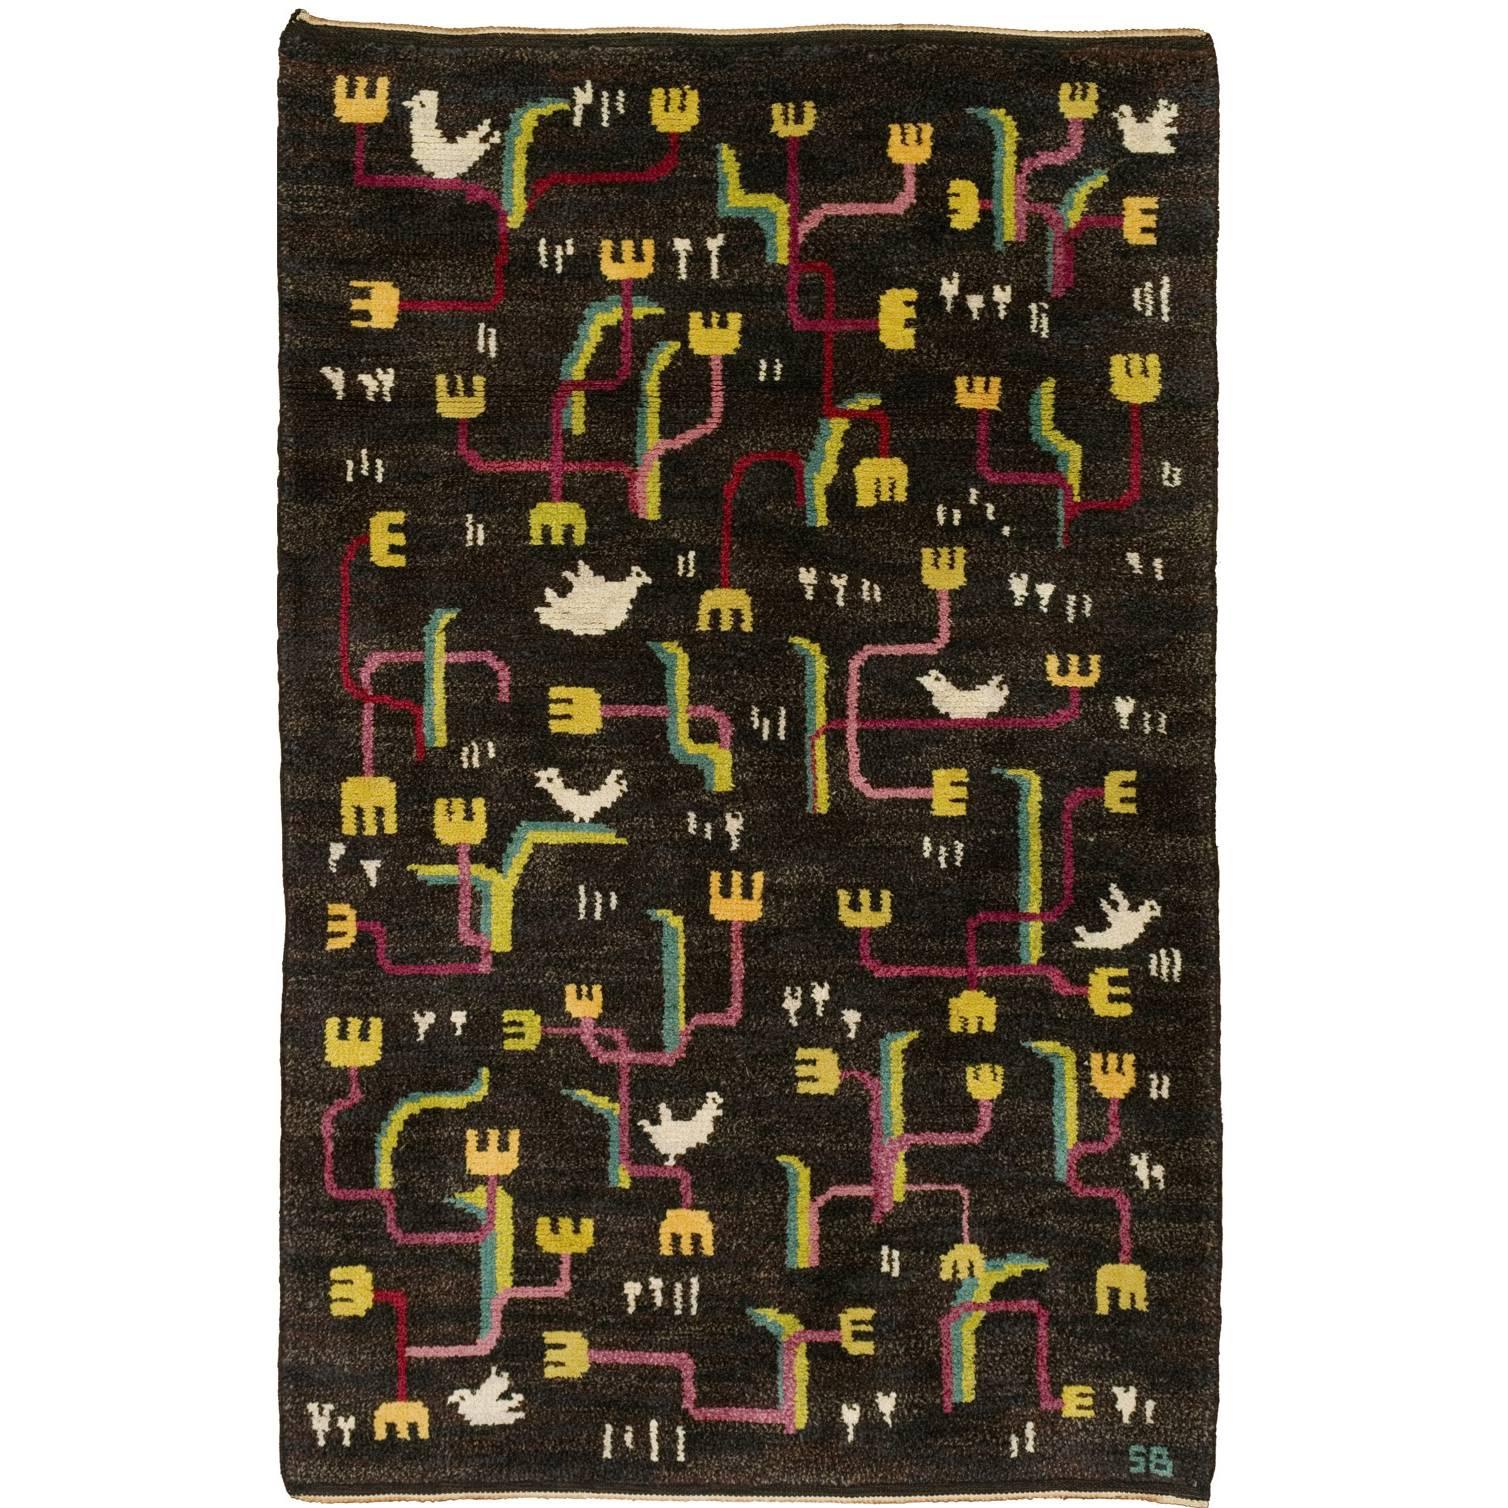 "Song of the Birds" Mid-20th Century Swedish Pile Rug by Sigvard Bernadotte